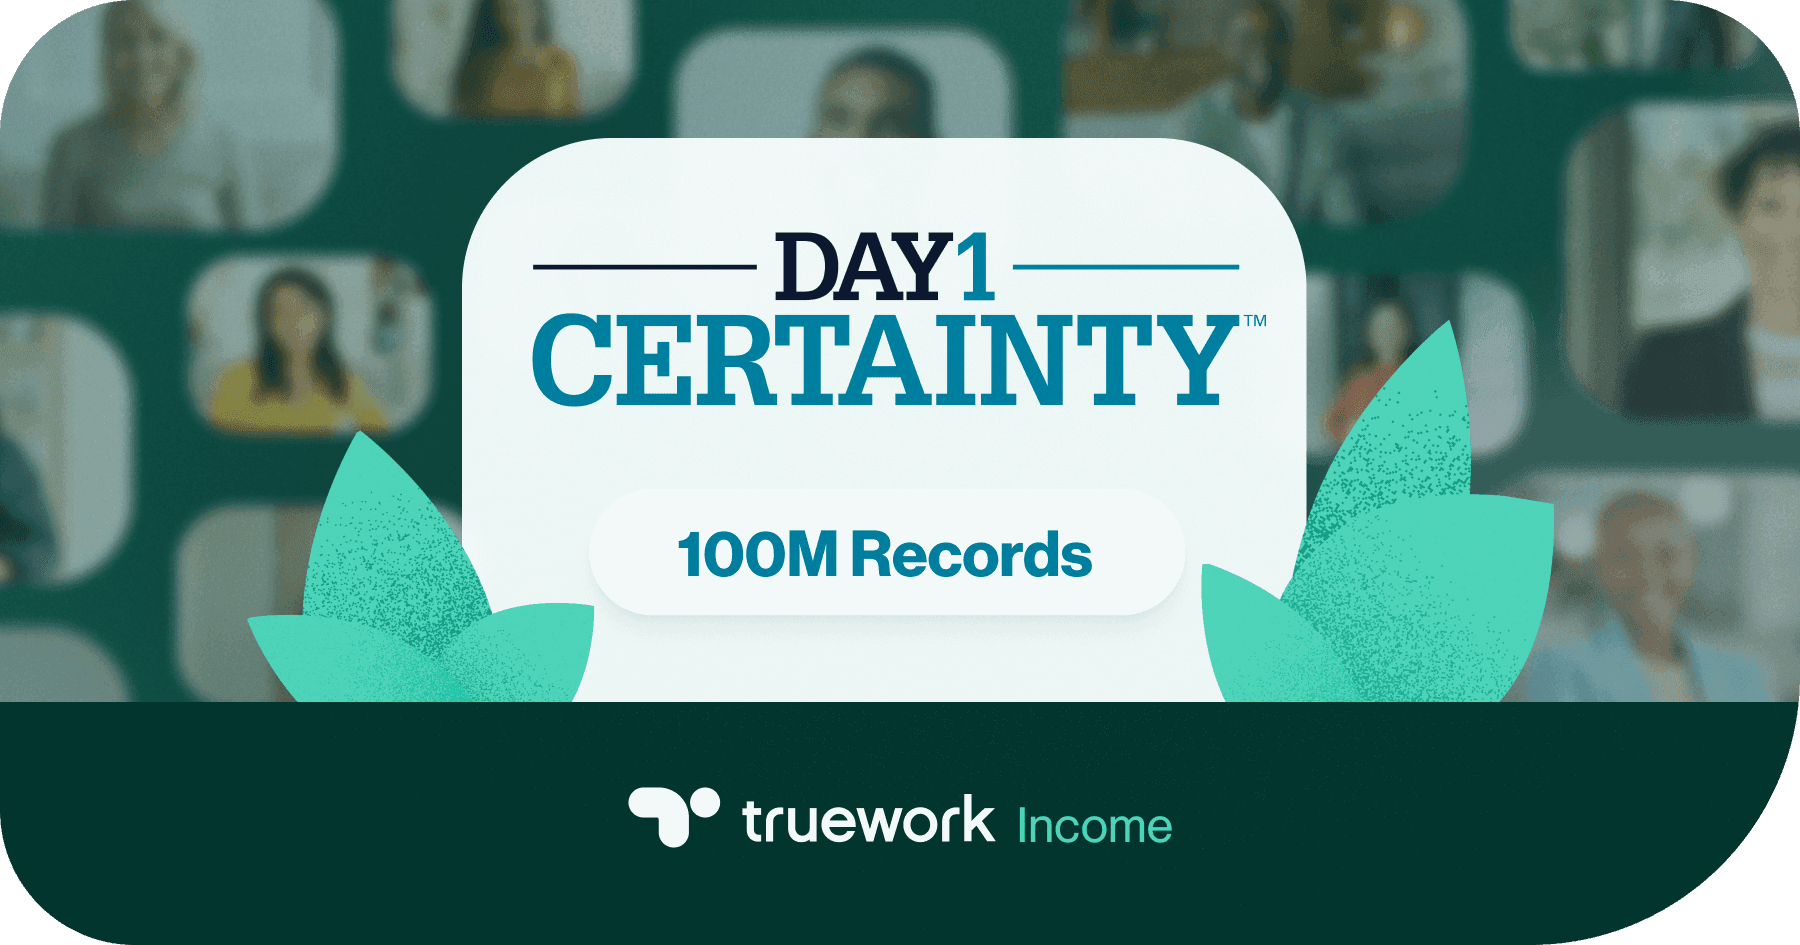 100M records now eligible for Day 1 Certainty through Truework Income